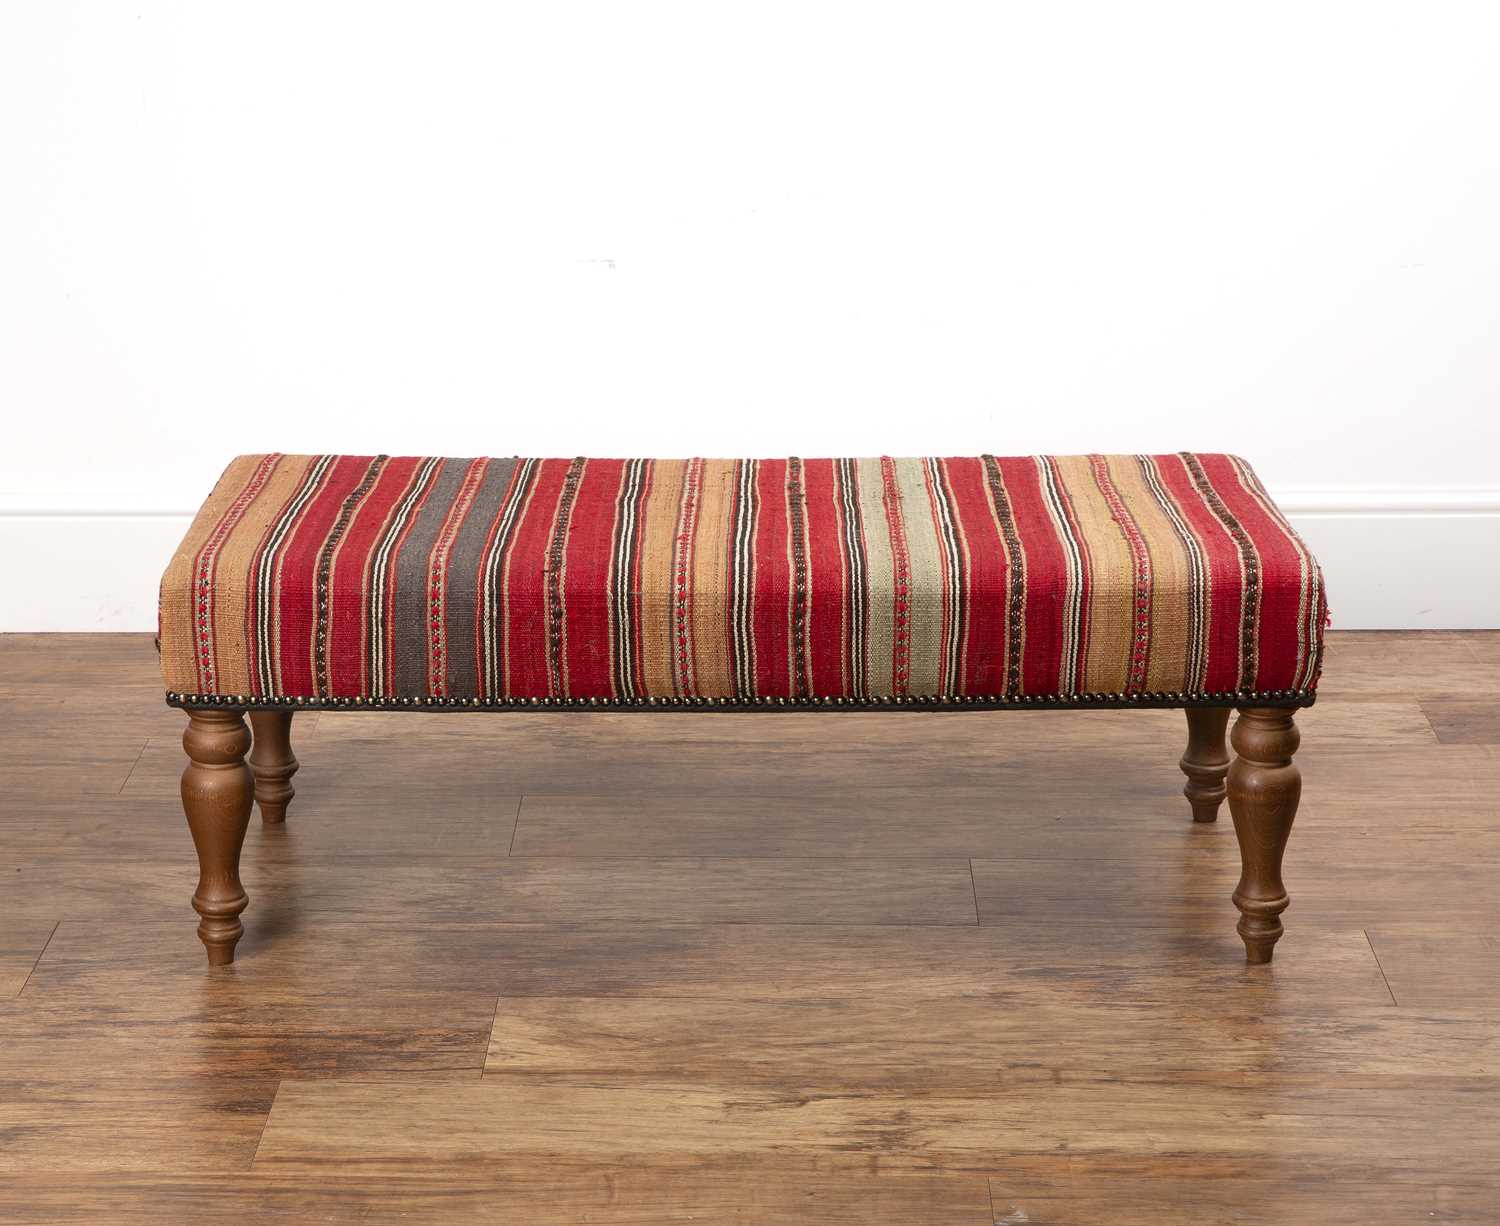 Contemporary footstool with a Kelim type cover, 102cm long x 46cm deep x 38cm high Provenance: The - Image 2 of 5